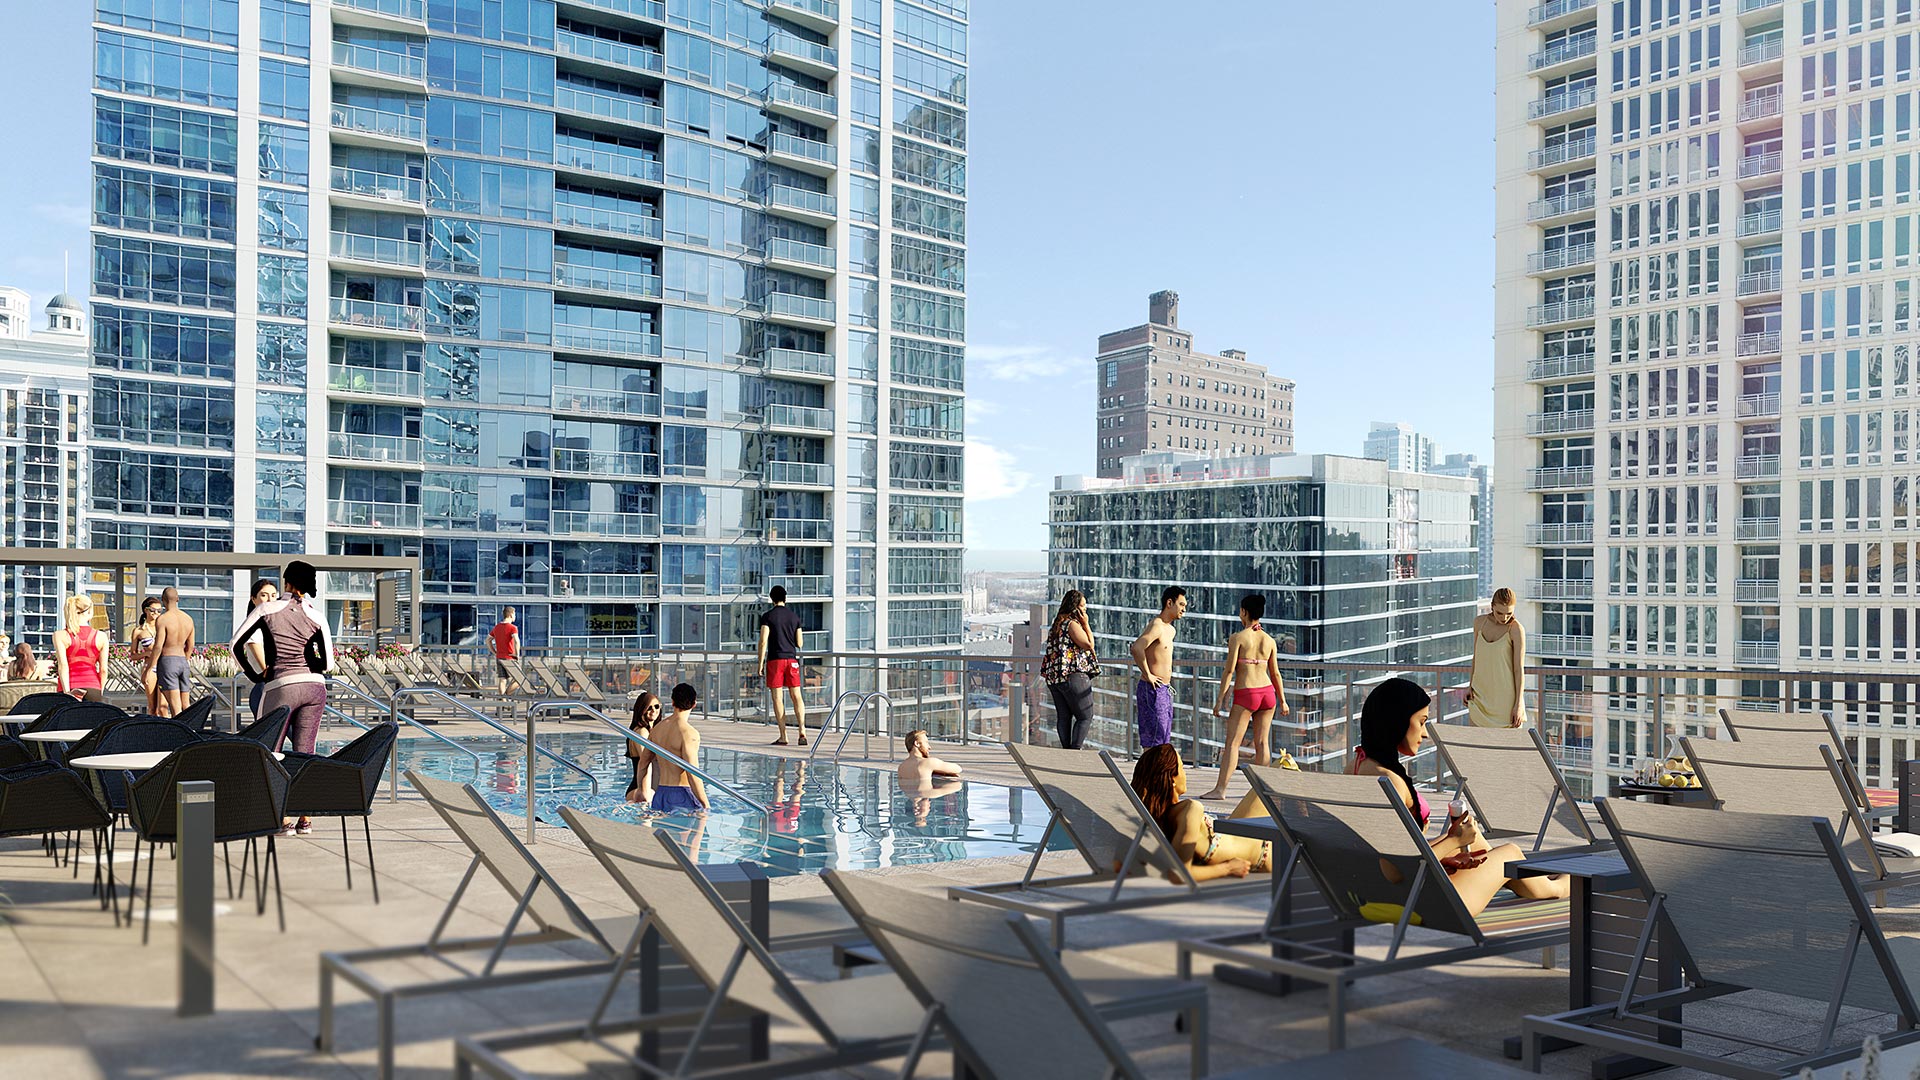 Looking for luxury apartments for rent near Chicago's South Loop?